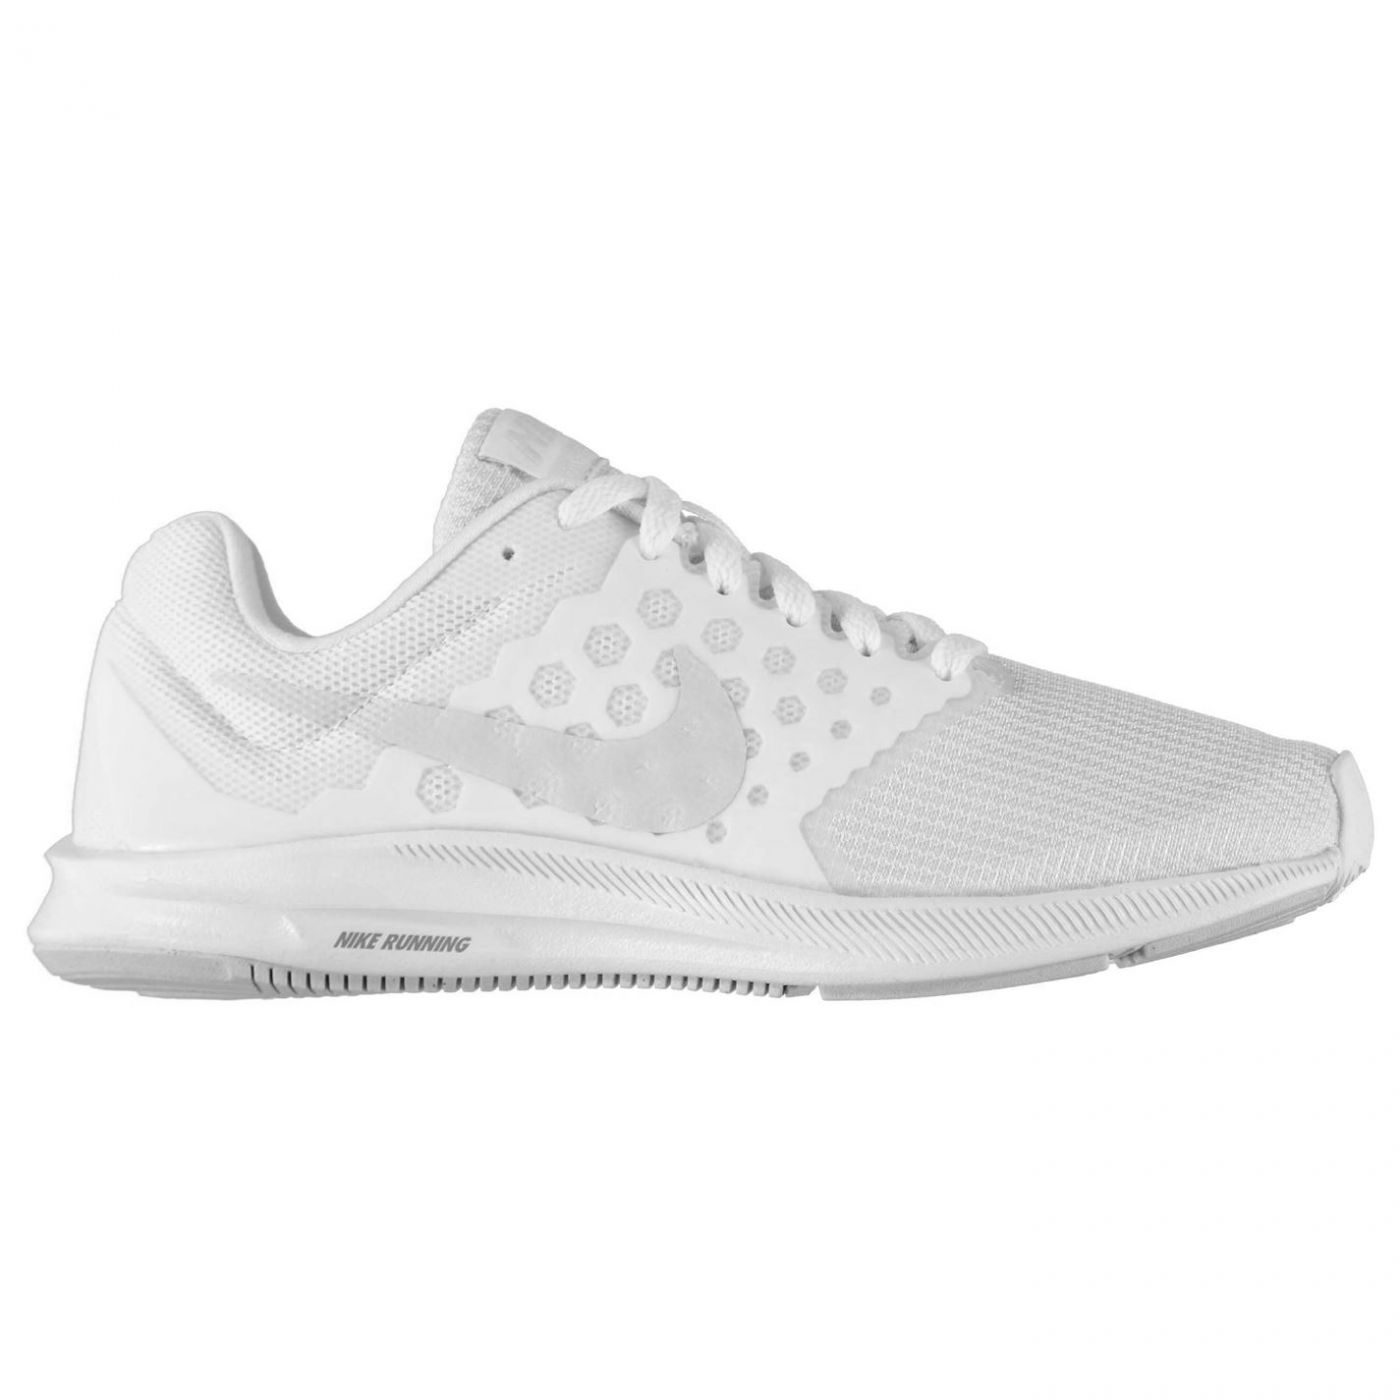 nike downshifter 7 ladies trainers